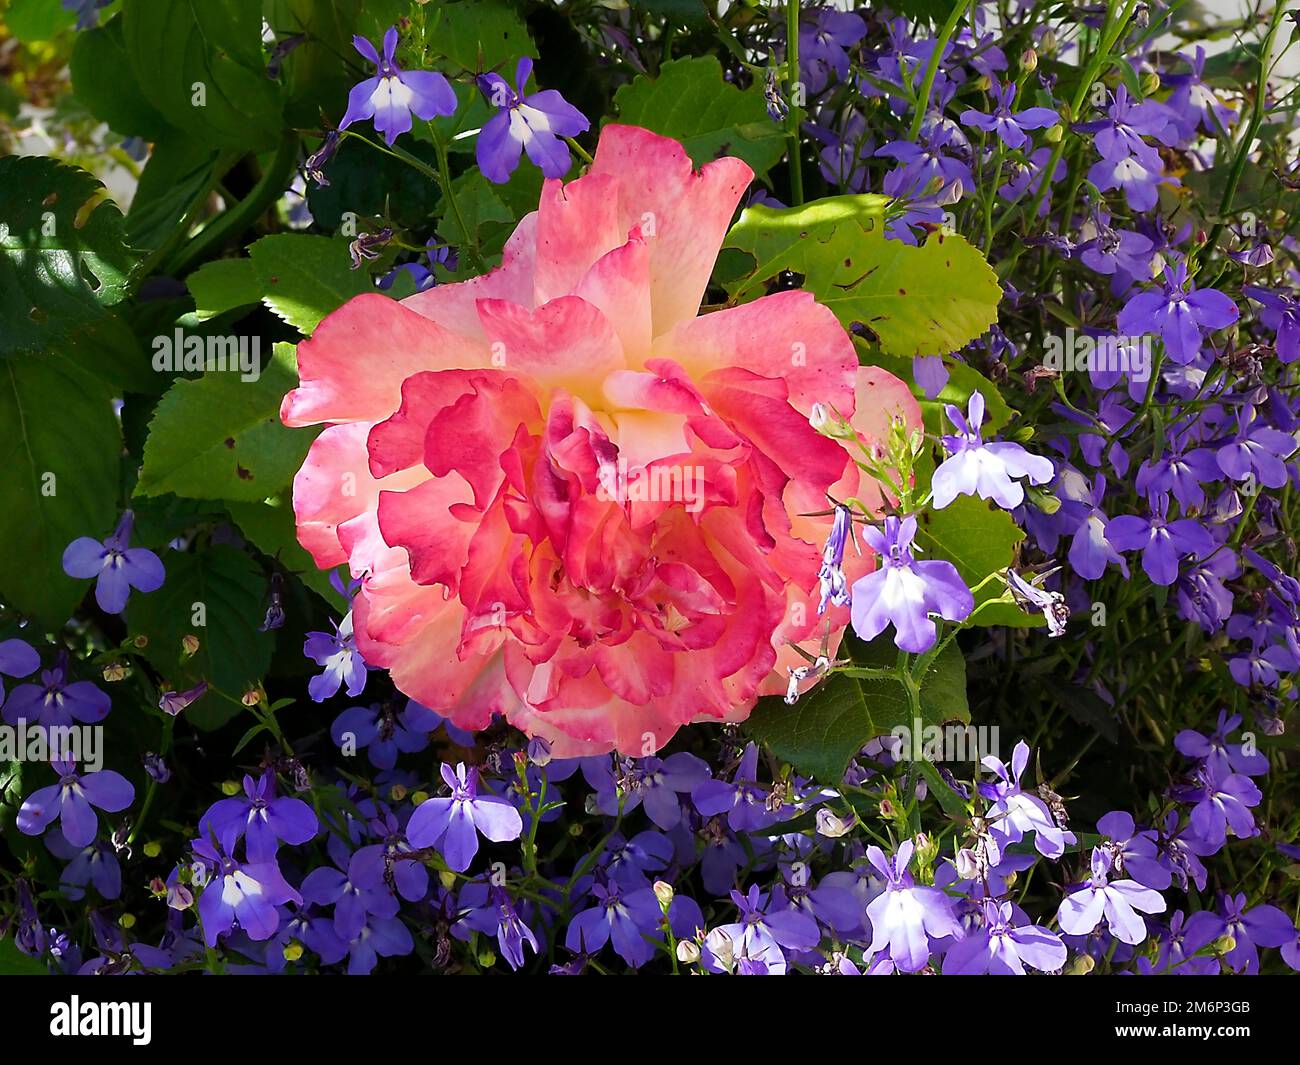 Closeup of pink rose flowers among blue lobebelia flowers in a french garden Stock Photo